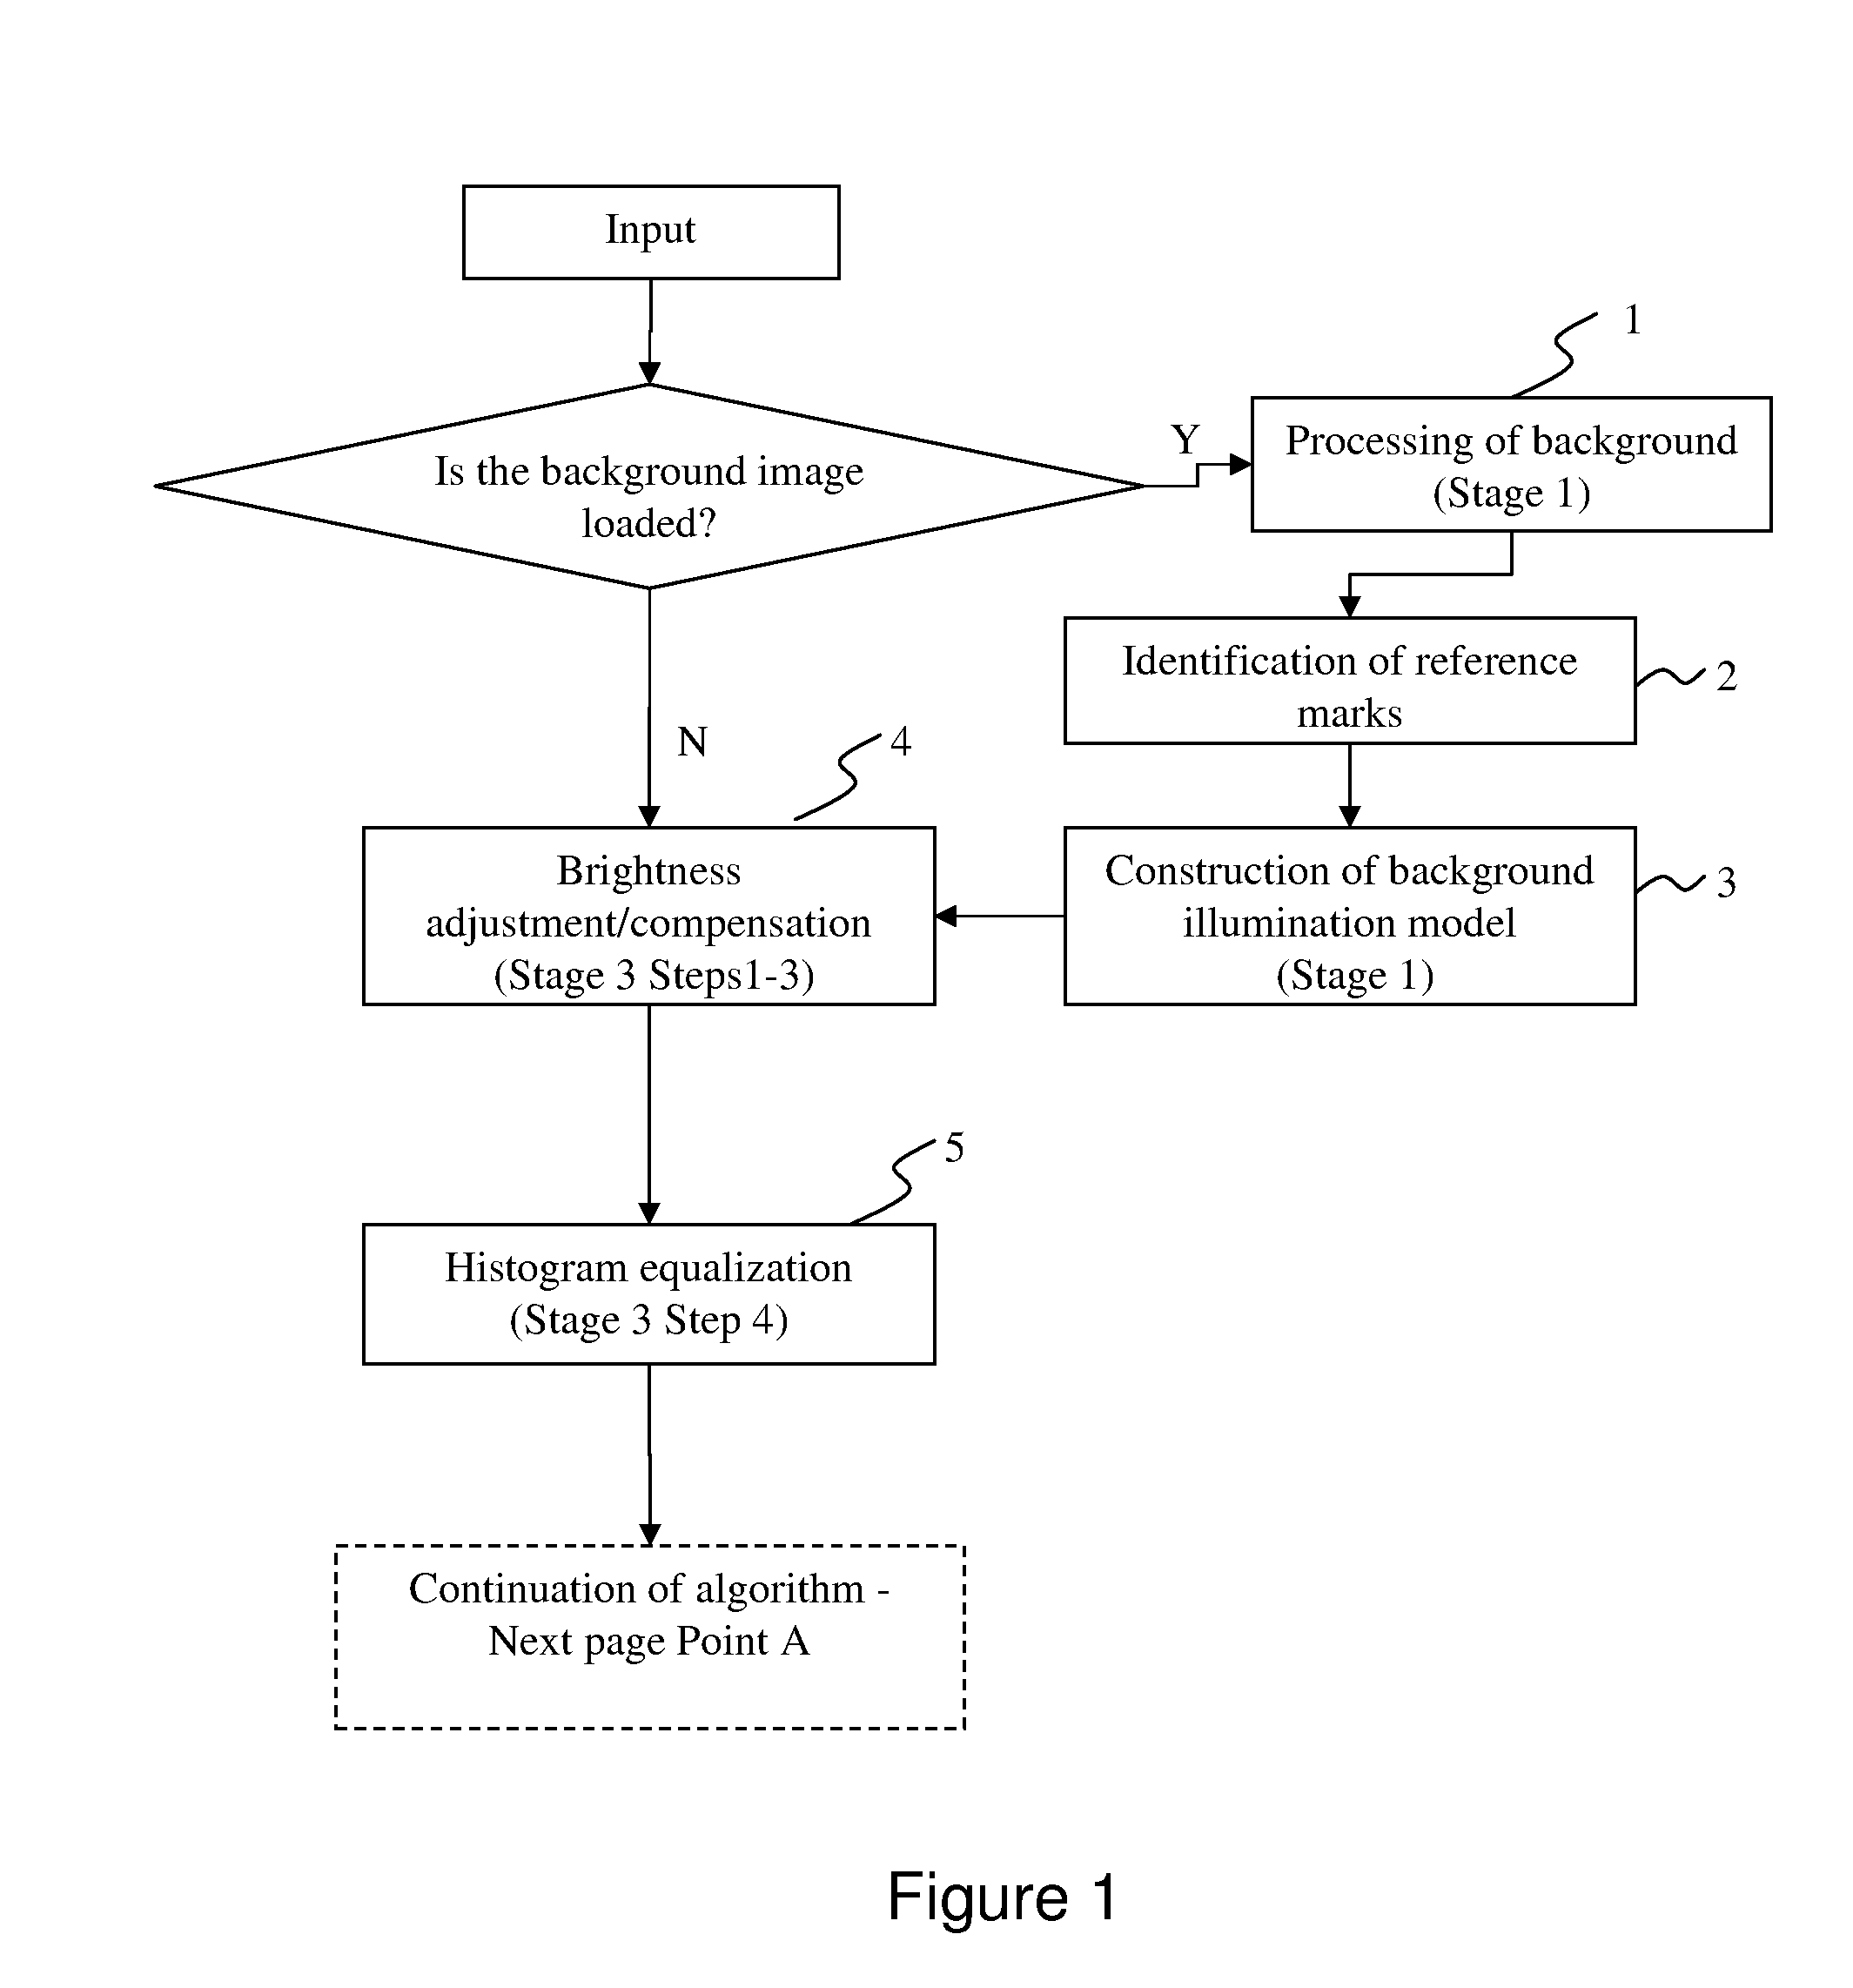 System and method for computer-aided image processing for generation of a 360 degree view model